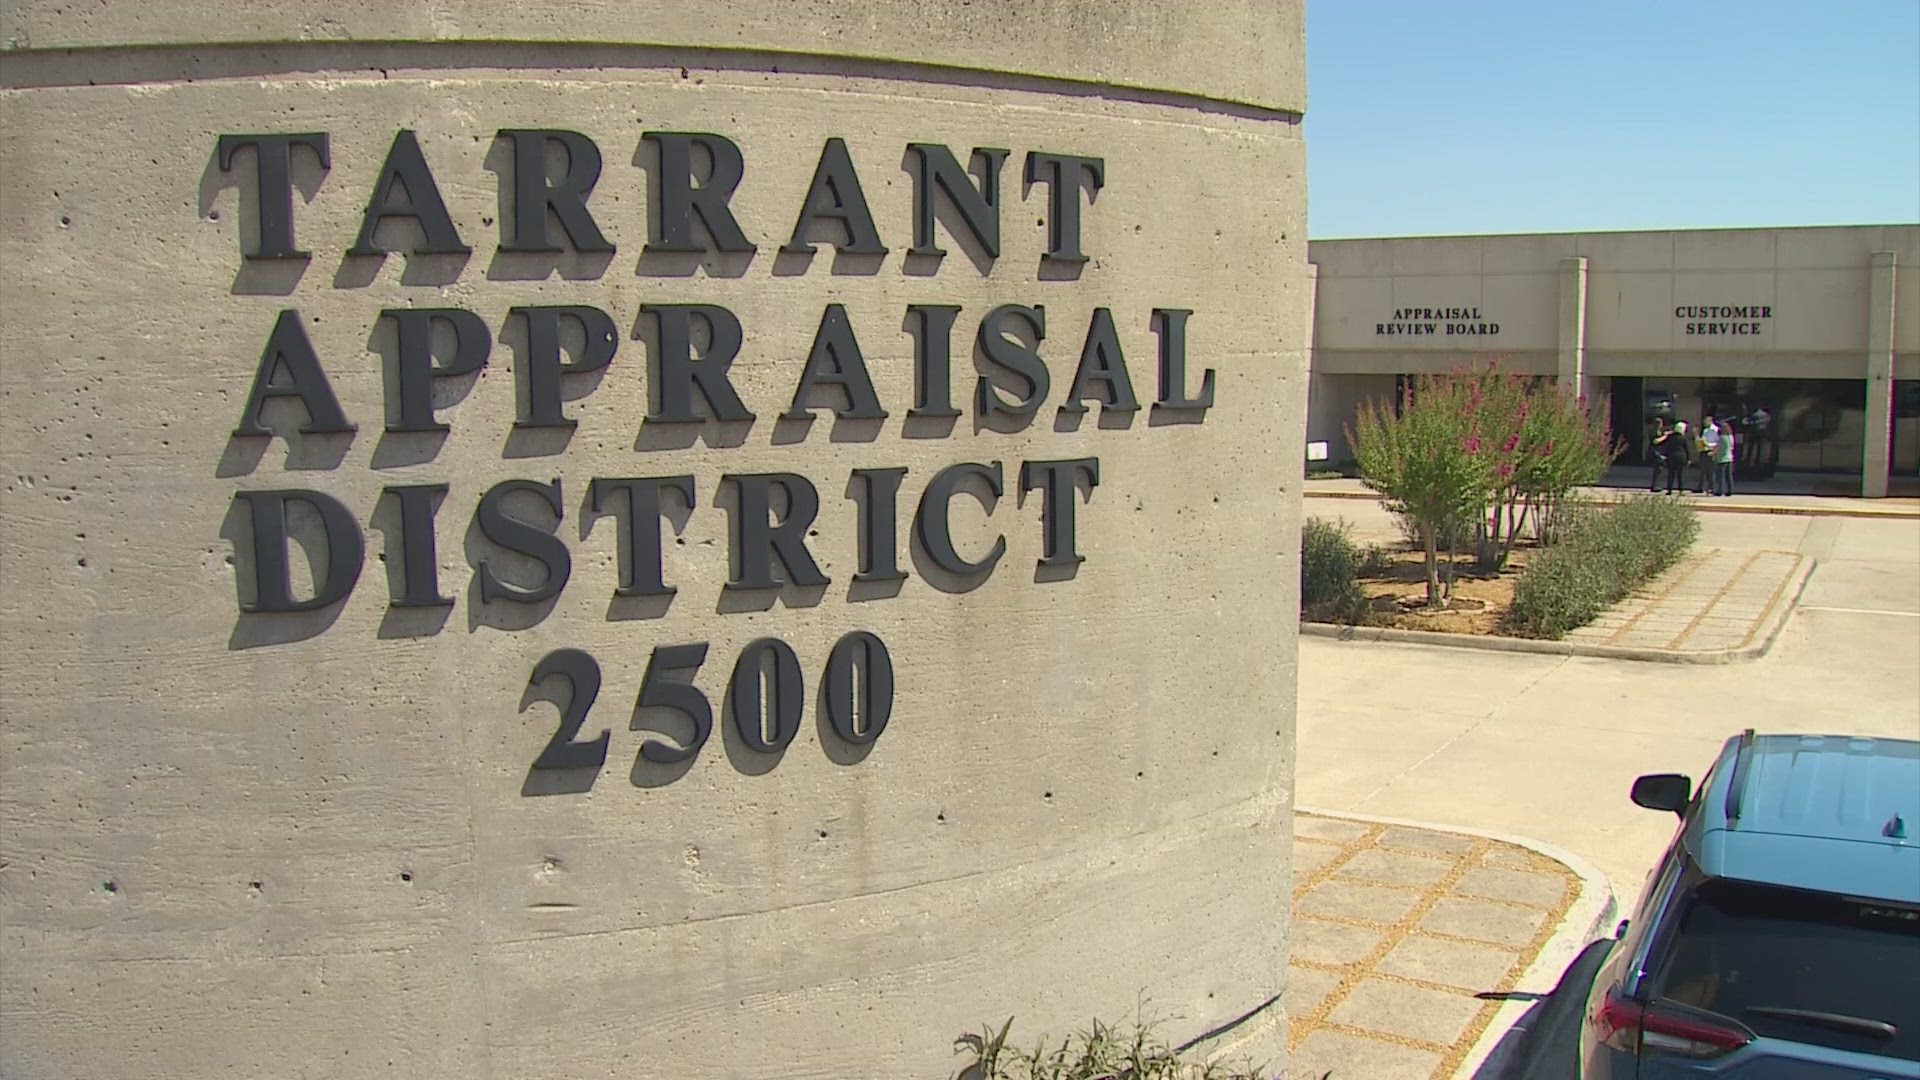 The Tarrant Appraisal District Monday appointed an interim chief appraiser and voted "no confidence" in ex-chief Jeff Law. Law resigned for another job in September.